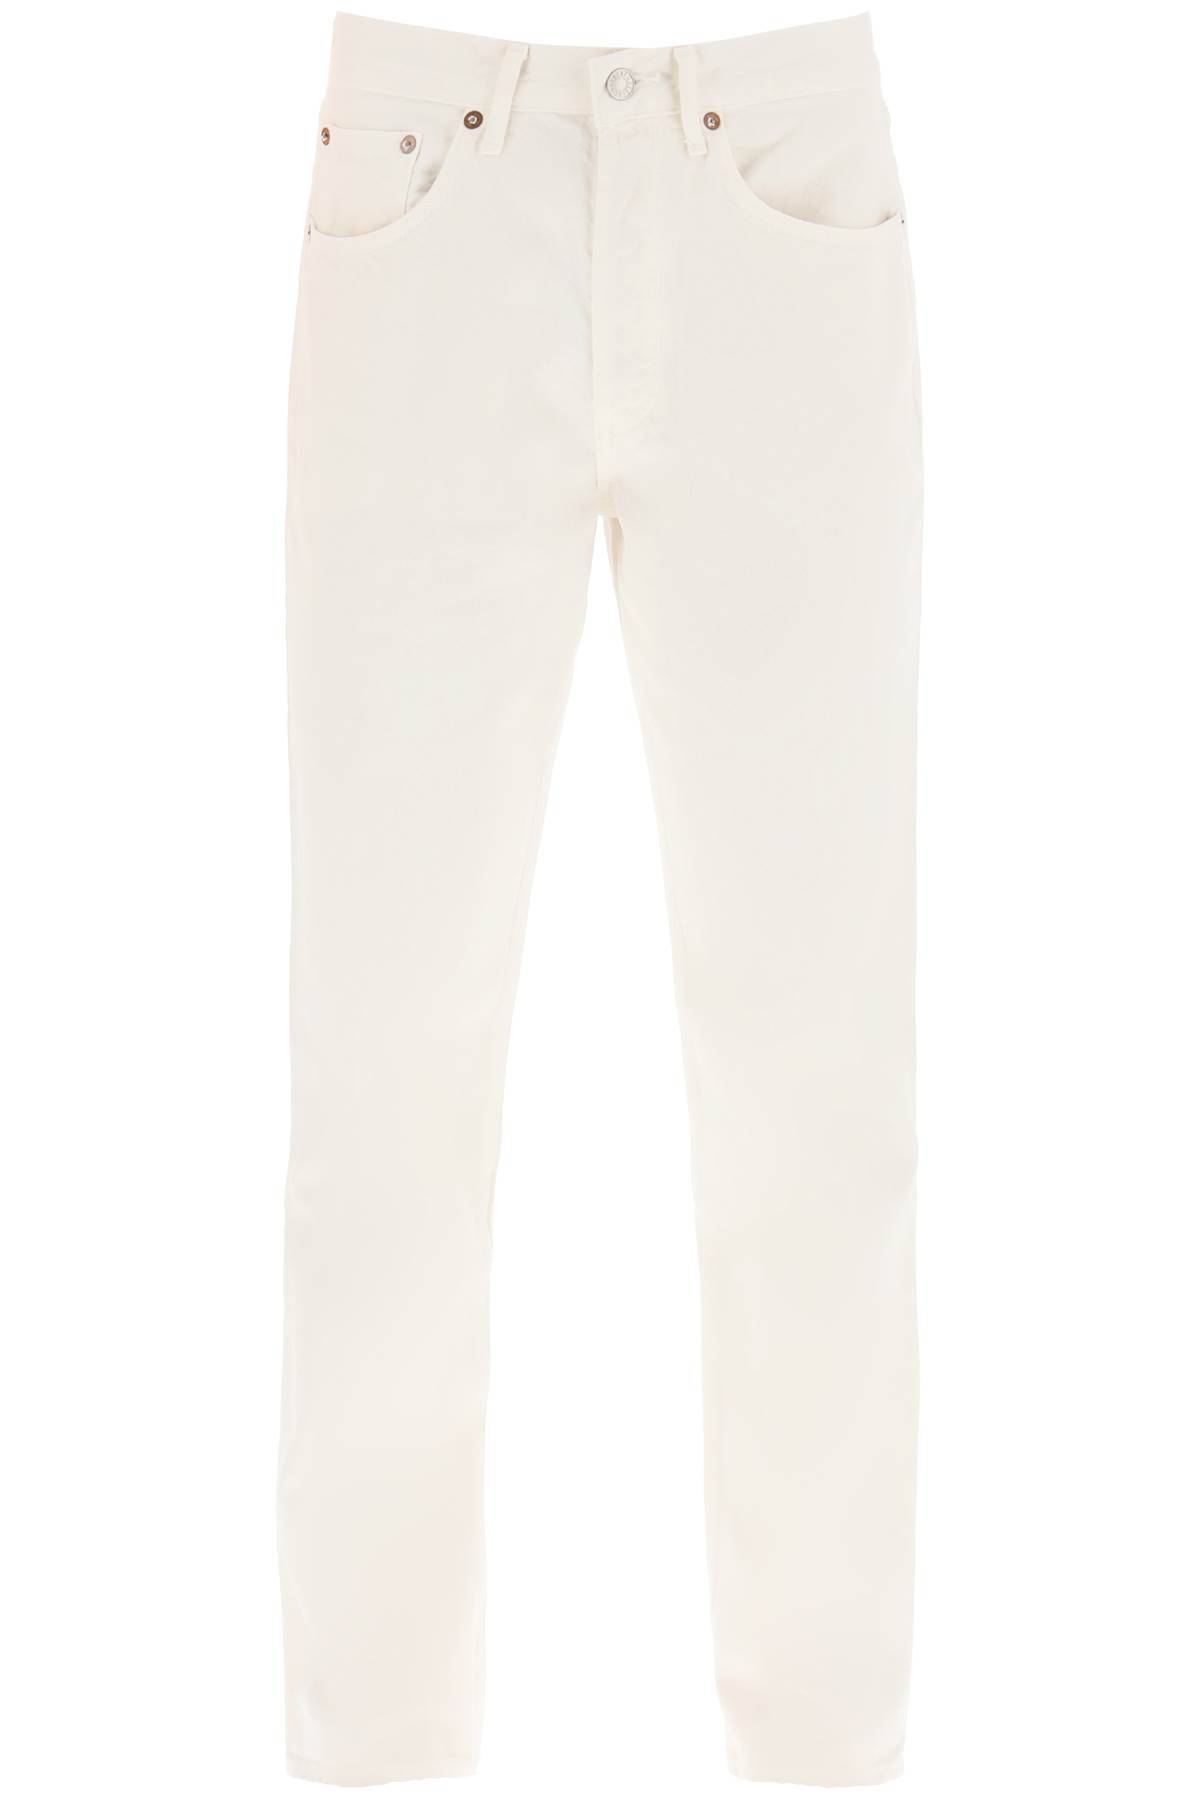 AGOLDE AGOLDE lana straight mid rise jeans